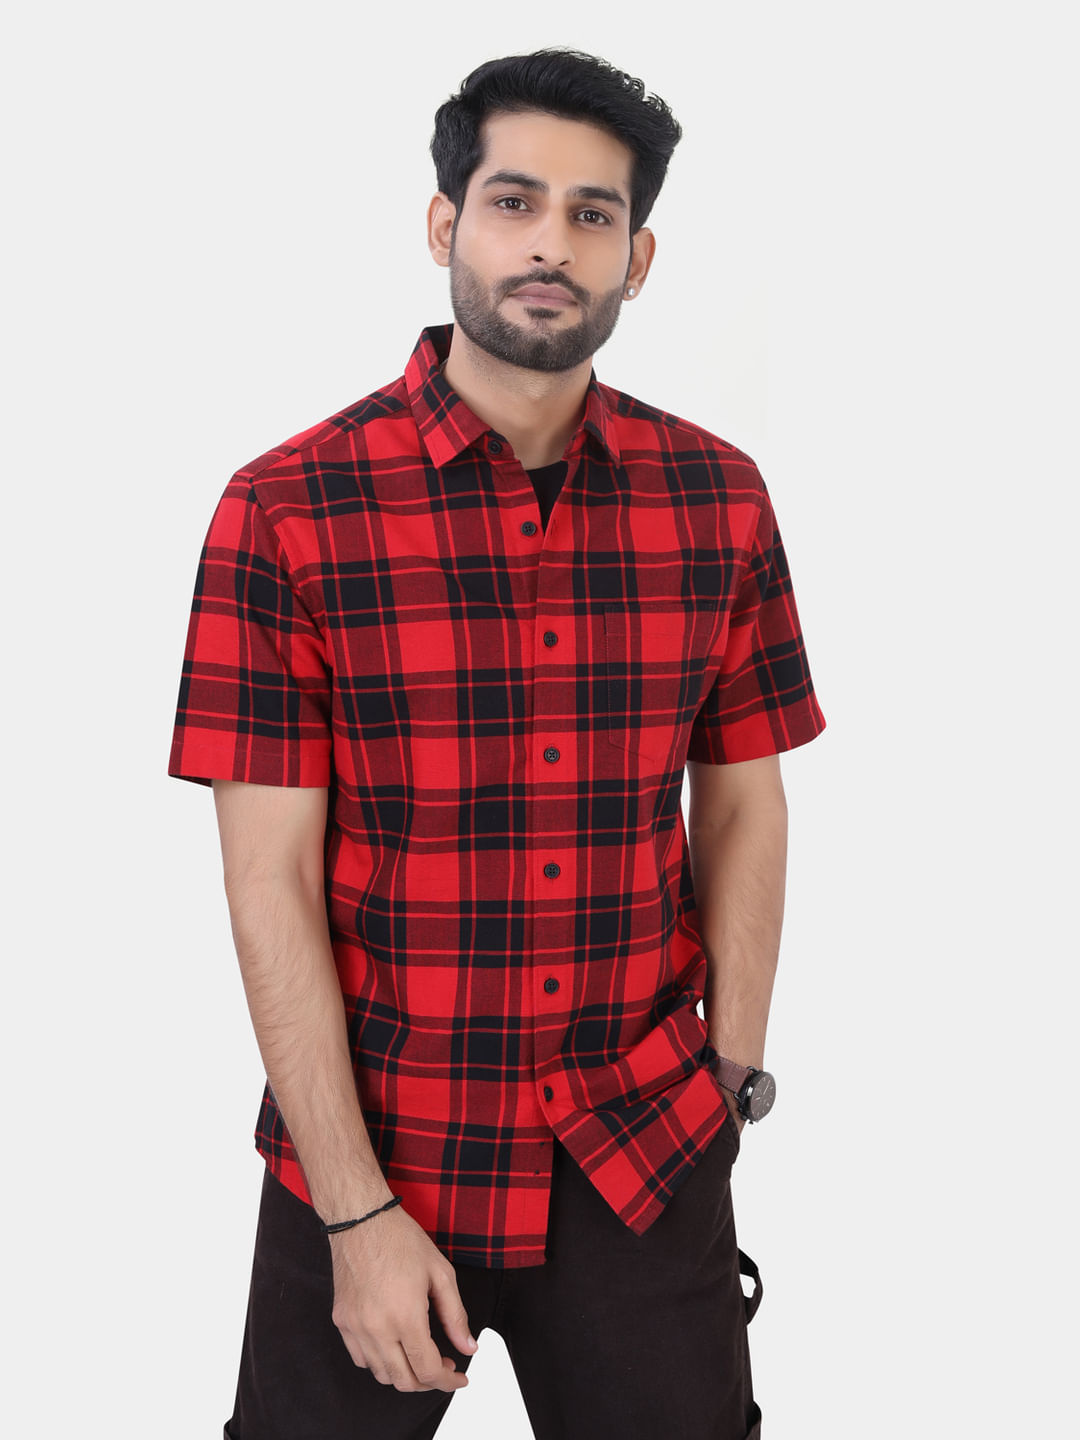 Red and black checkered shirt